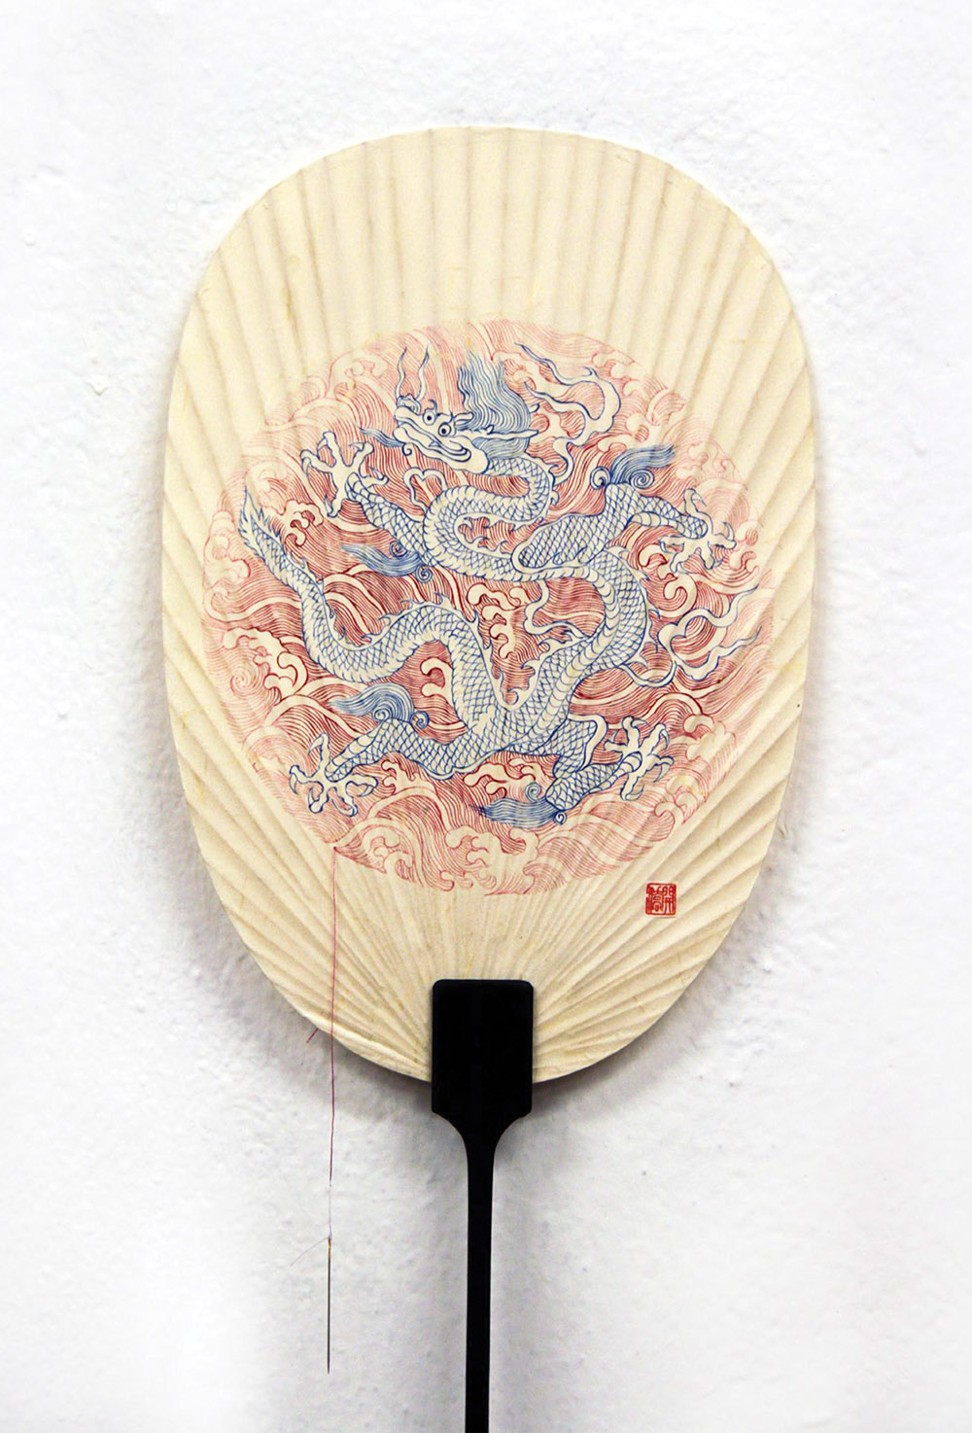 Embroidering with Strokes by Hui Hoi-kiu. Chinese ink and colour on paper fan, needle, thread.